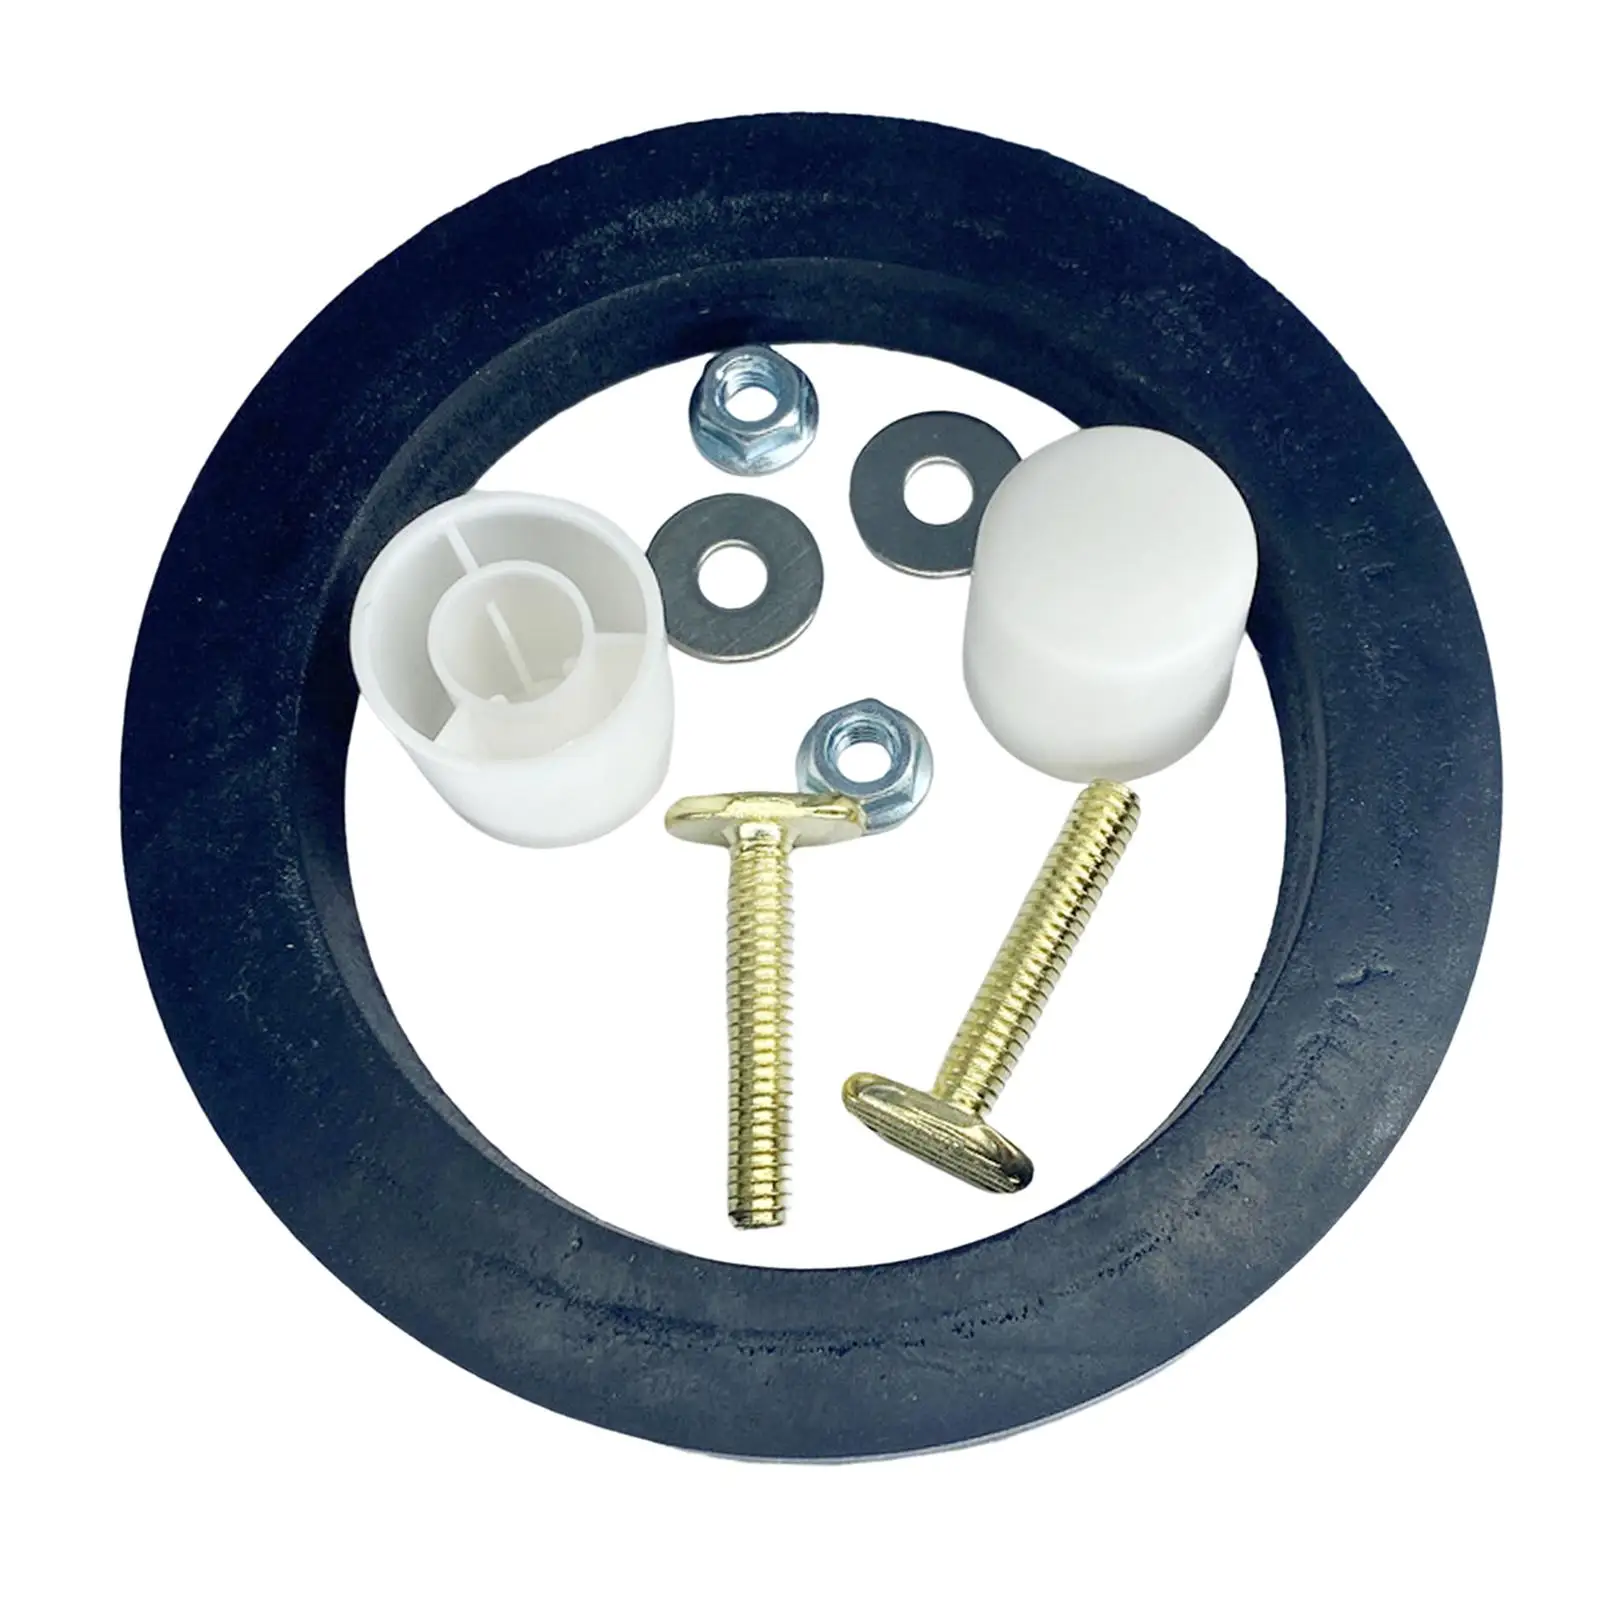 RV Toilet Parts Seal Kit for 300, 310, 320 Series Flush Ball Seal Durable